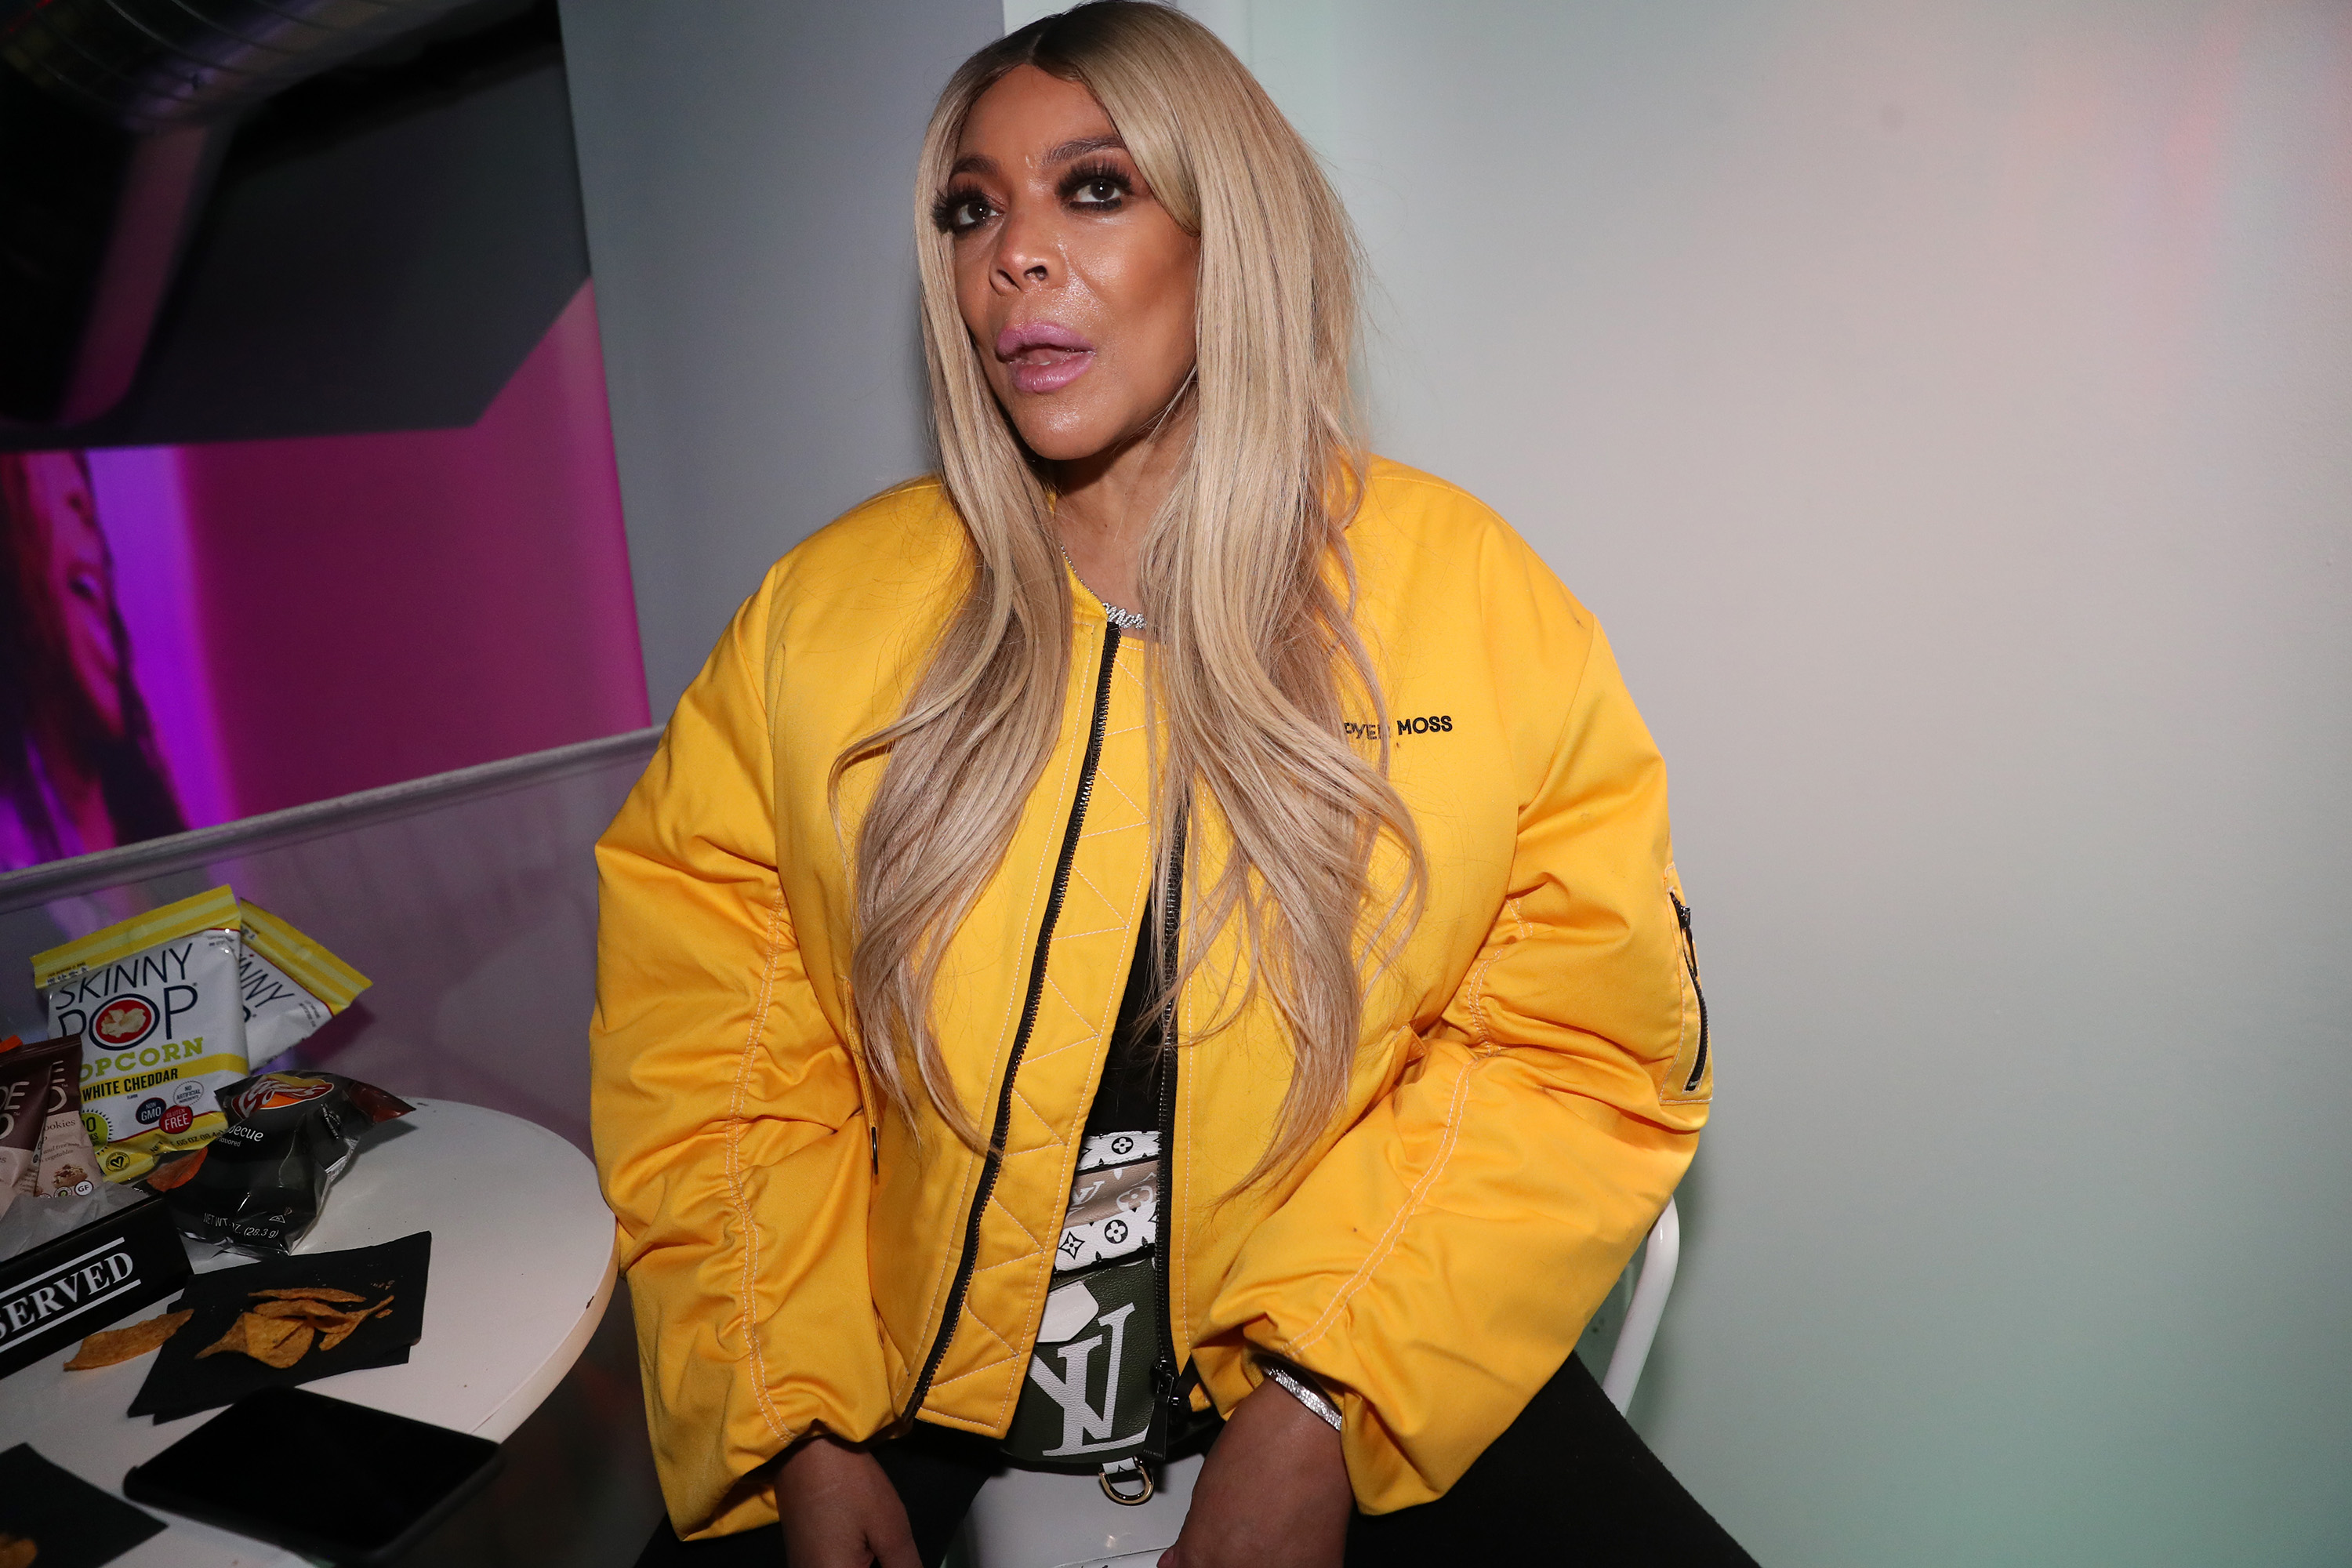 Wendy Williams attends the "New Cash Order" documentary screening at Lighthouse International Theater on February 20, 2020 in New York City. | Source: Getty Images